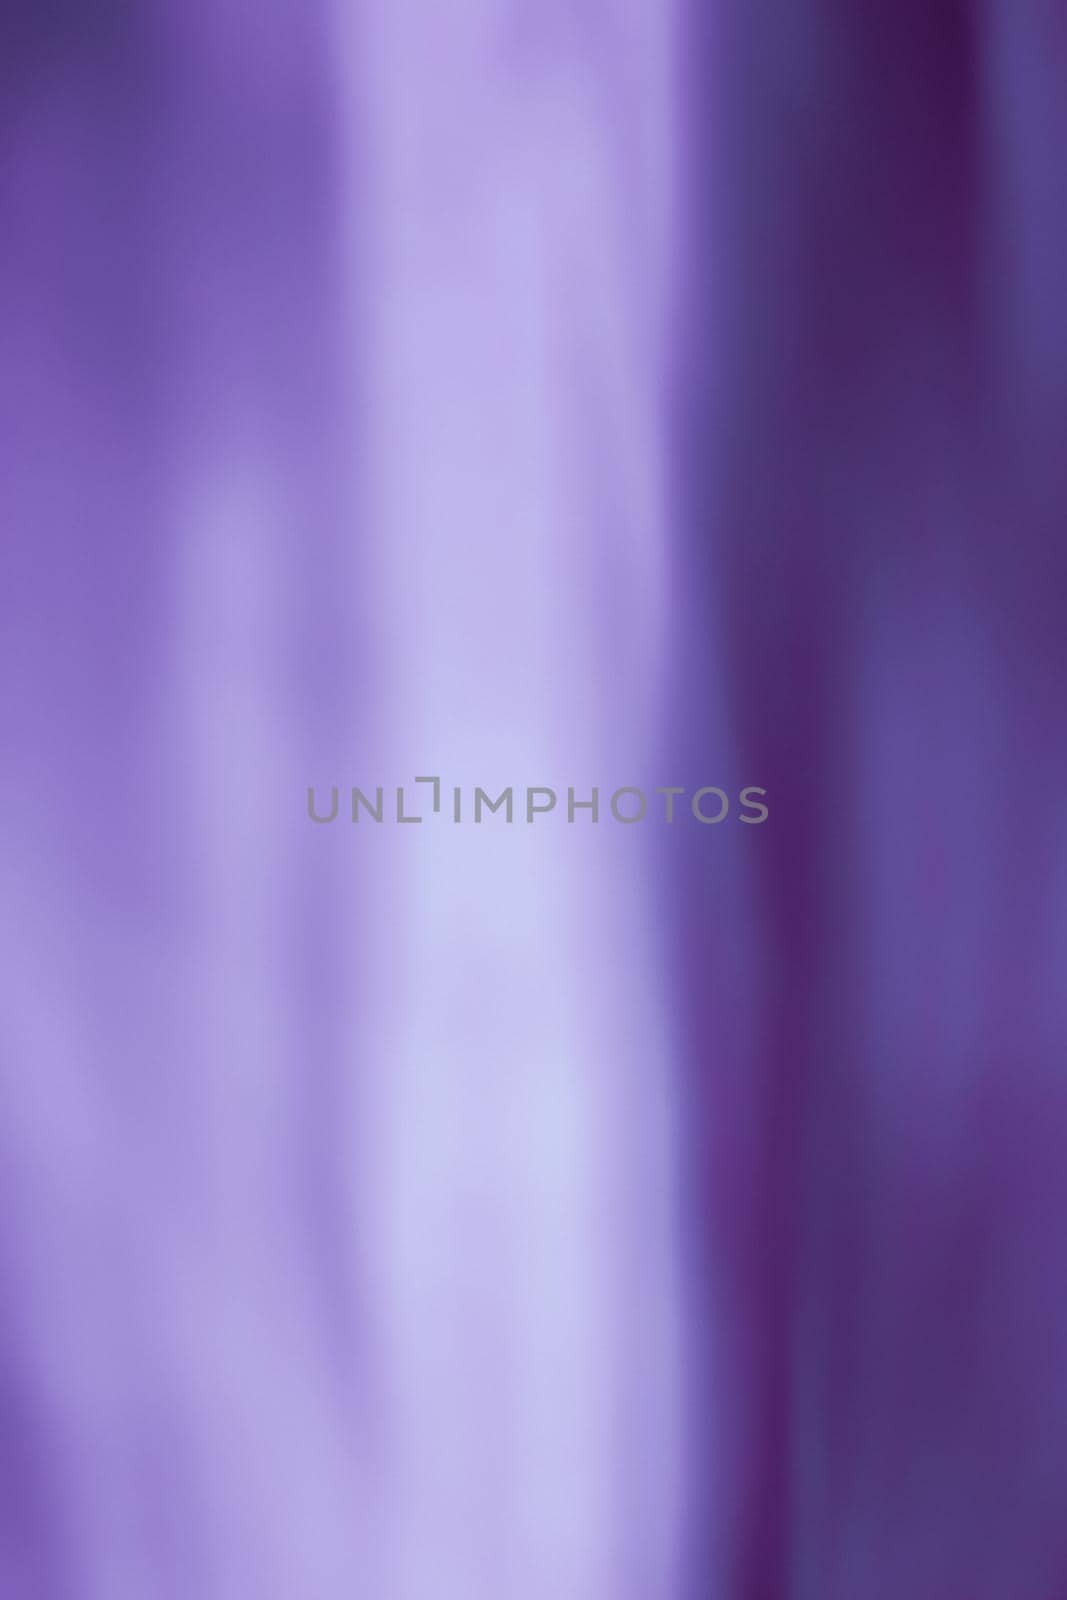 Holiday branding, beauty glamour and cyber backgrounds concept - Purple abstract art background, silk texture and wave lines in motion for classic luxury design